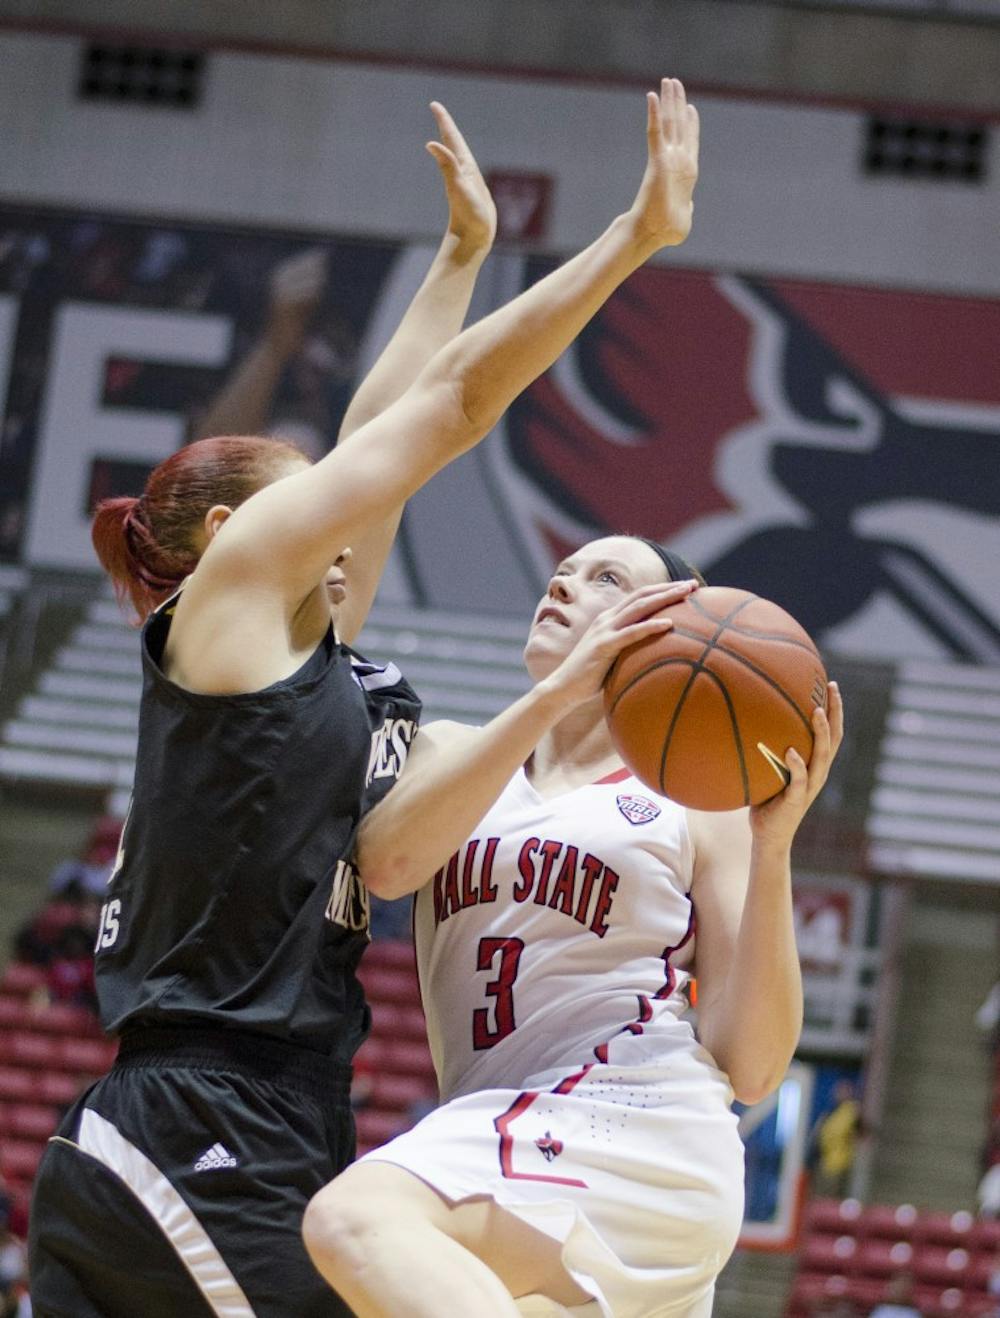 Senior guard Shelbie Justice goes up for a lay-up during the game against Western Michigan on Jan. 10 at Worthen Arena. DN PHOTO BREANNA DAUGHERTY